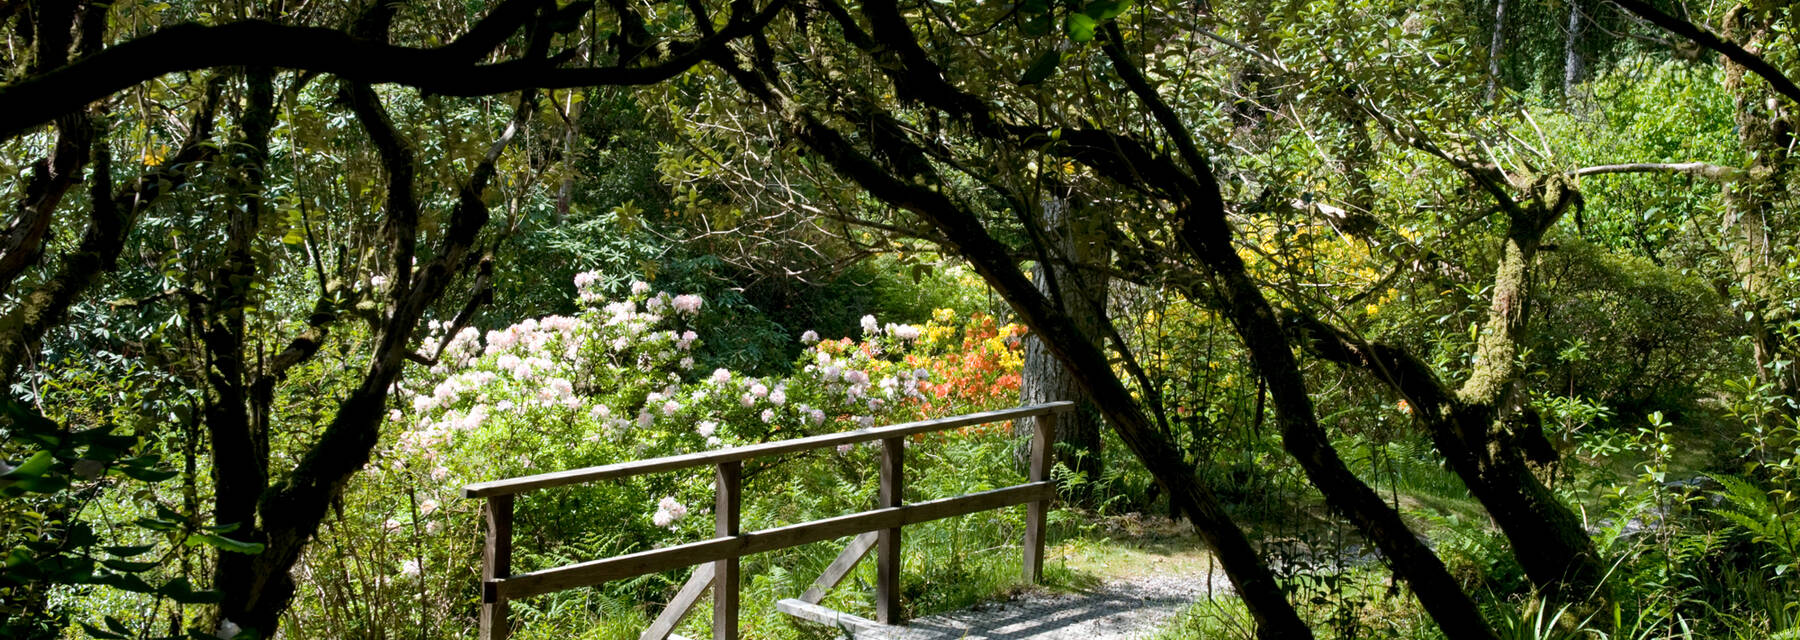 A path leads over a narrow footbridge in the wooded gorge area of Crarae Garden.